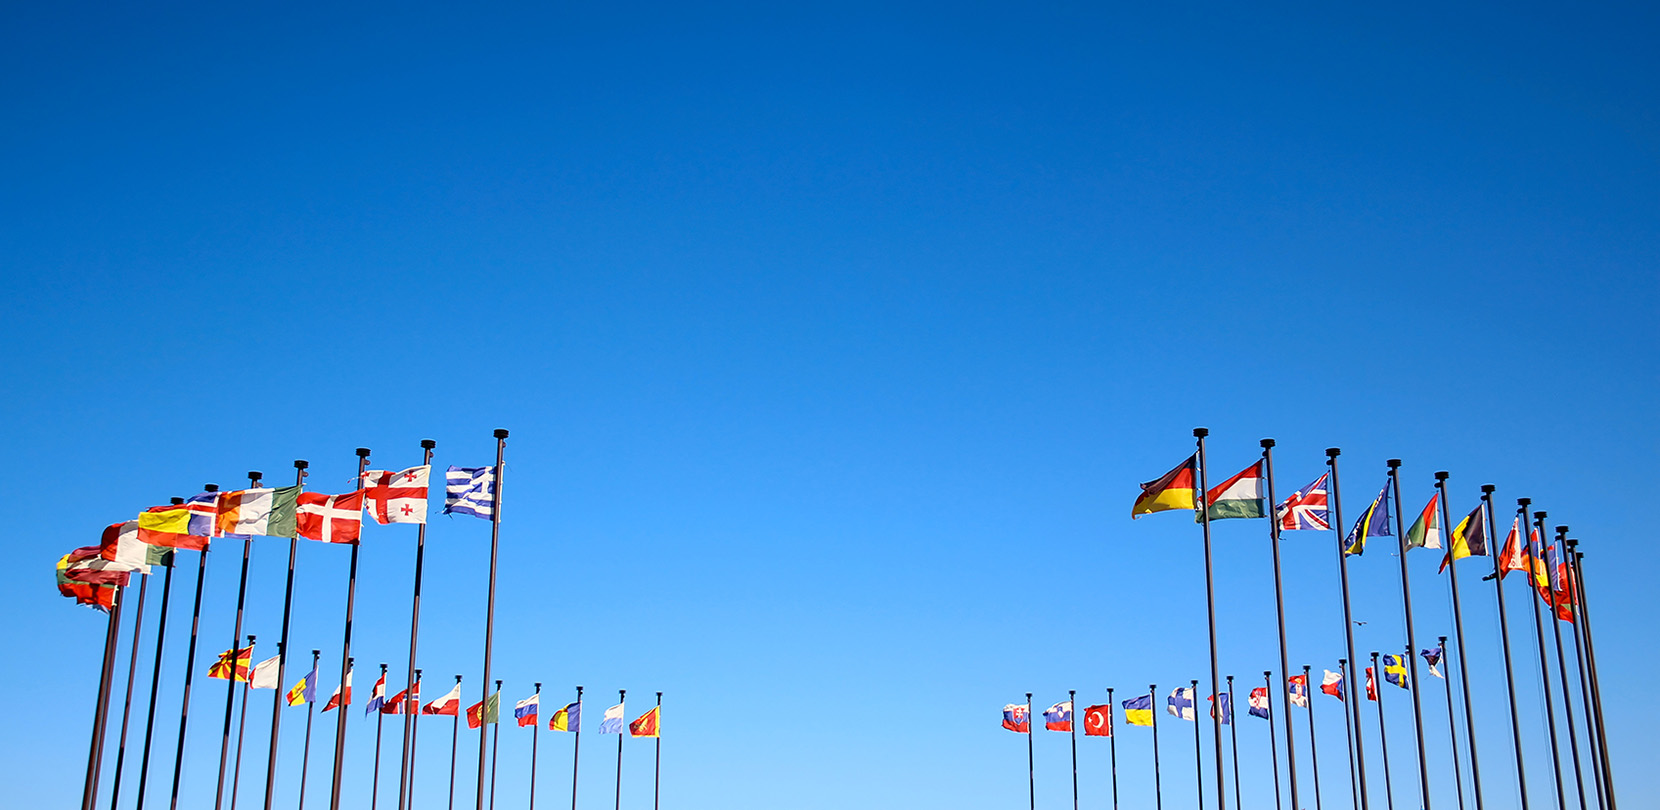 A ring of flags from different countries against a blue sky